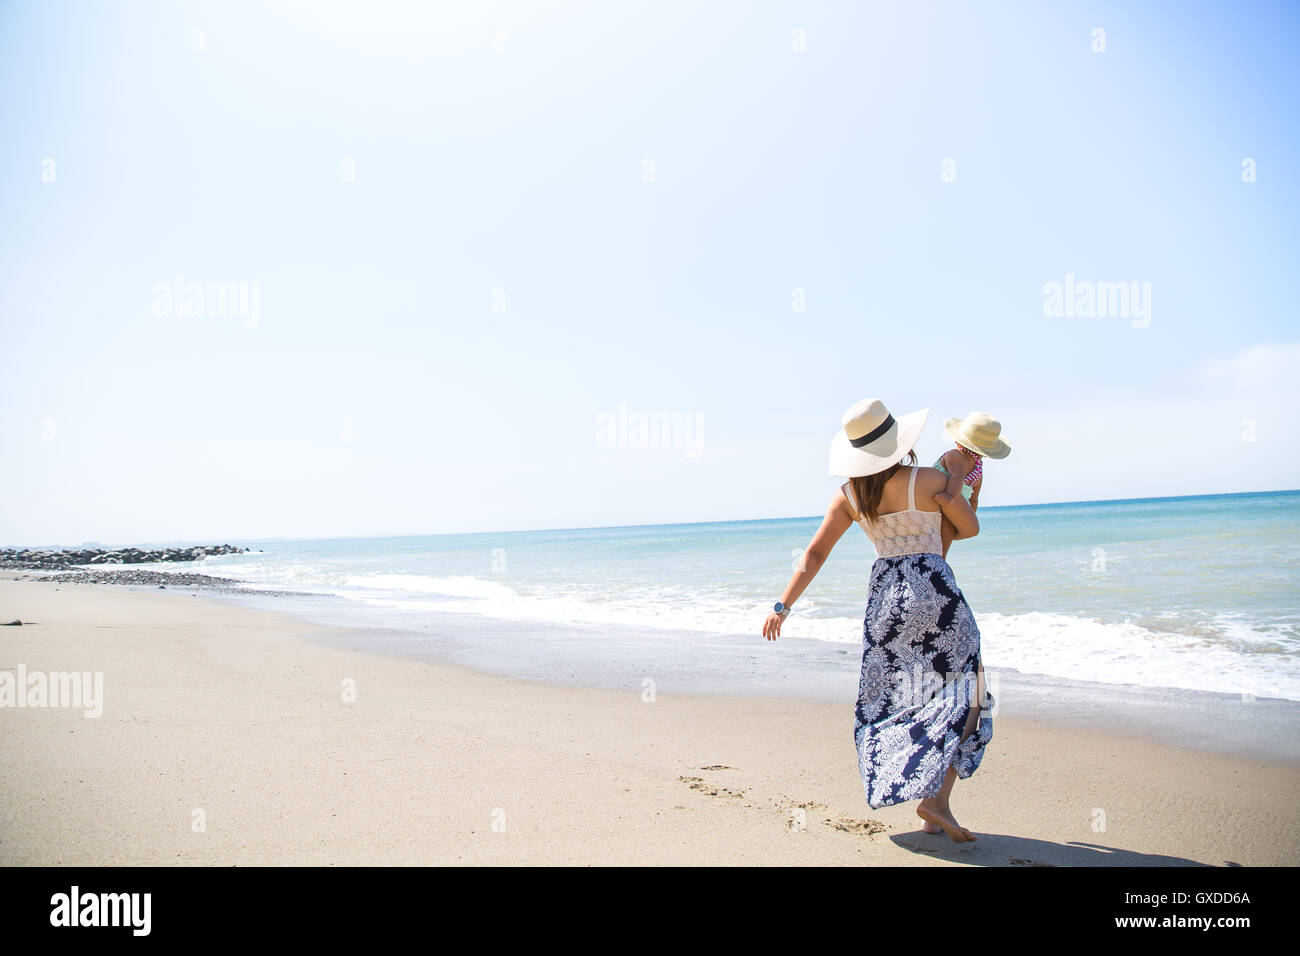 Rear view of mother carrying baby son on beach, Malibu, California, USA Stock Photo